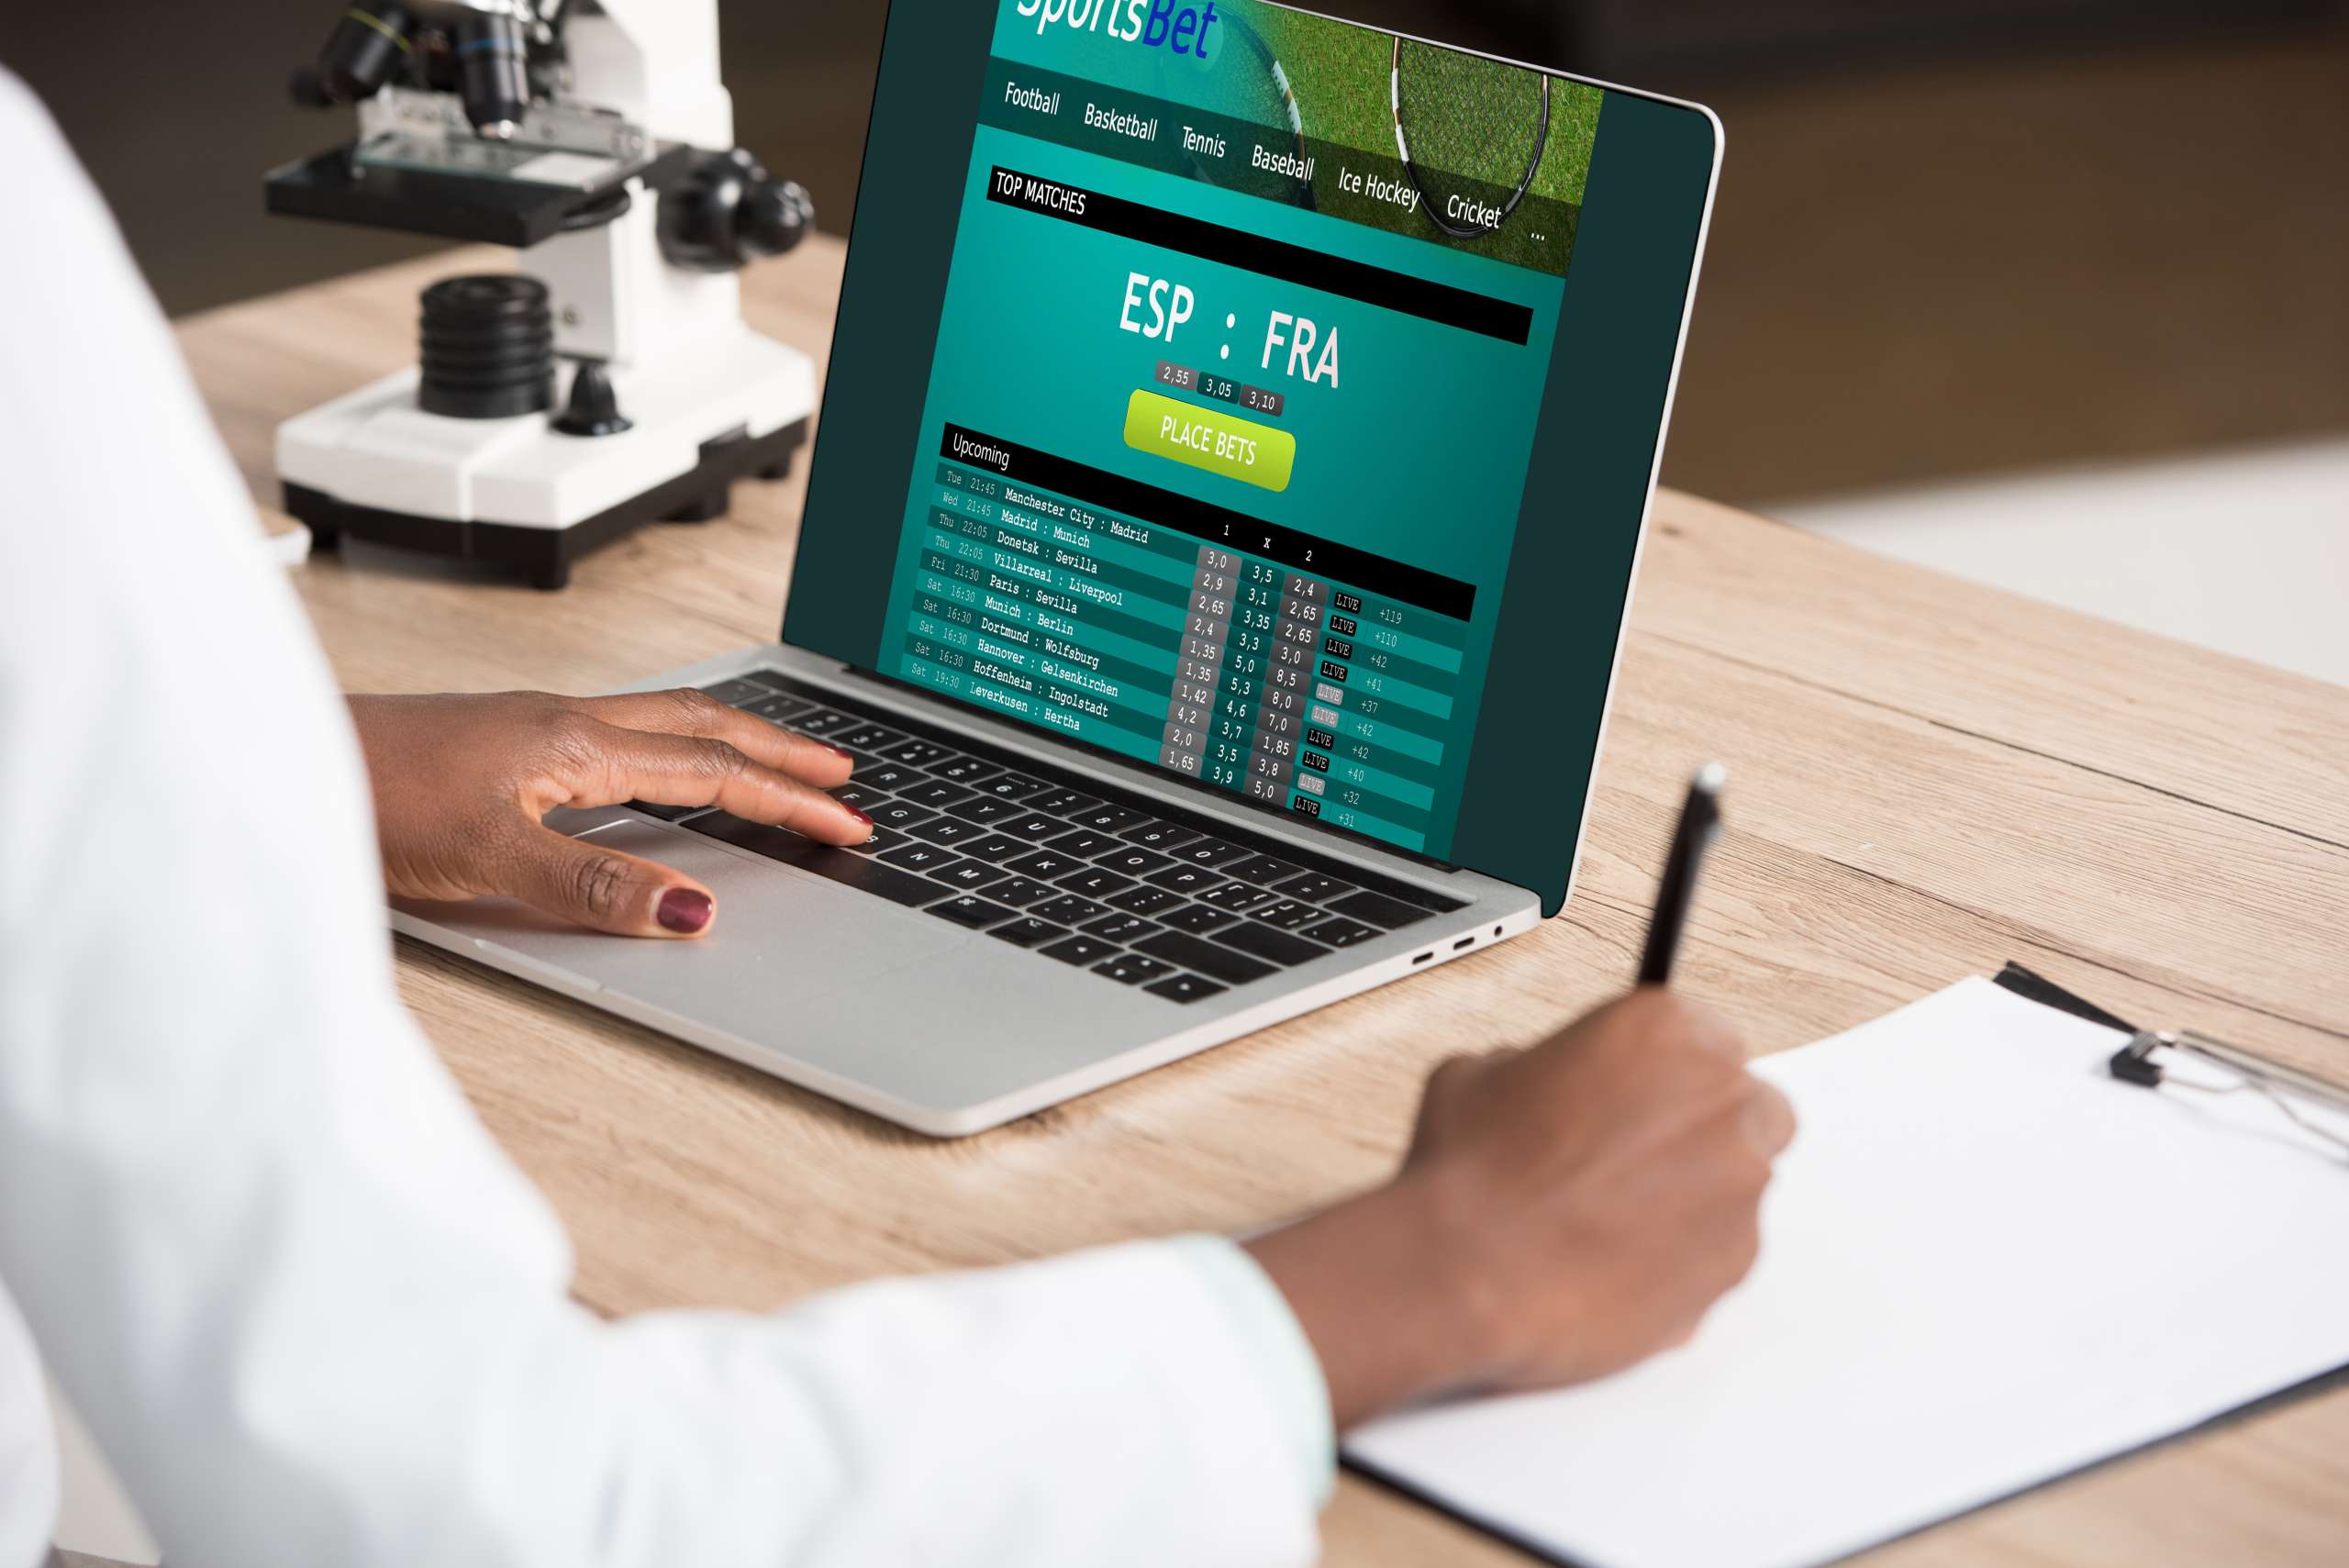 cropped view of african american doctor using laptop with sports bet website near microscope